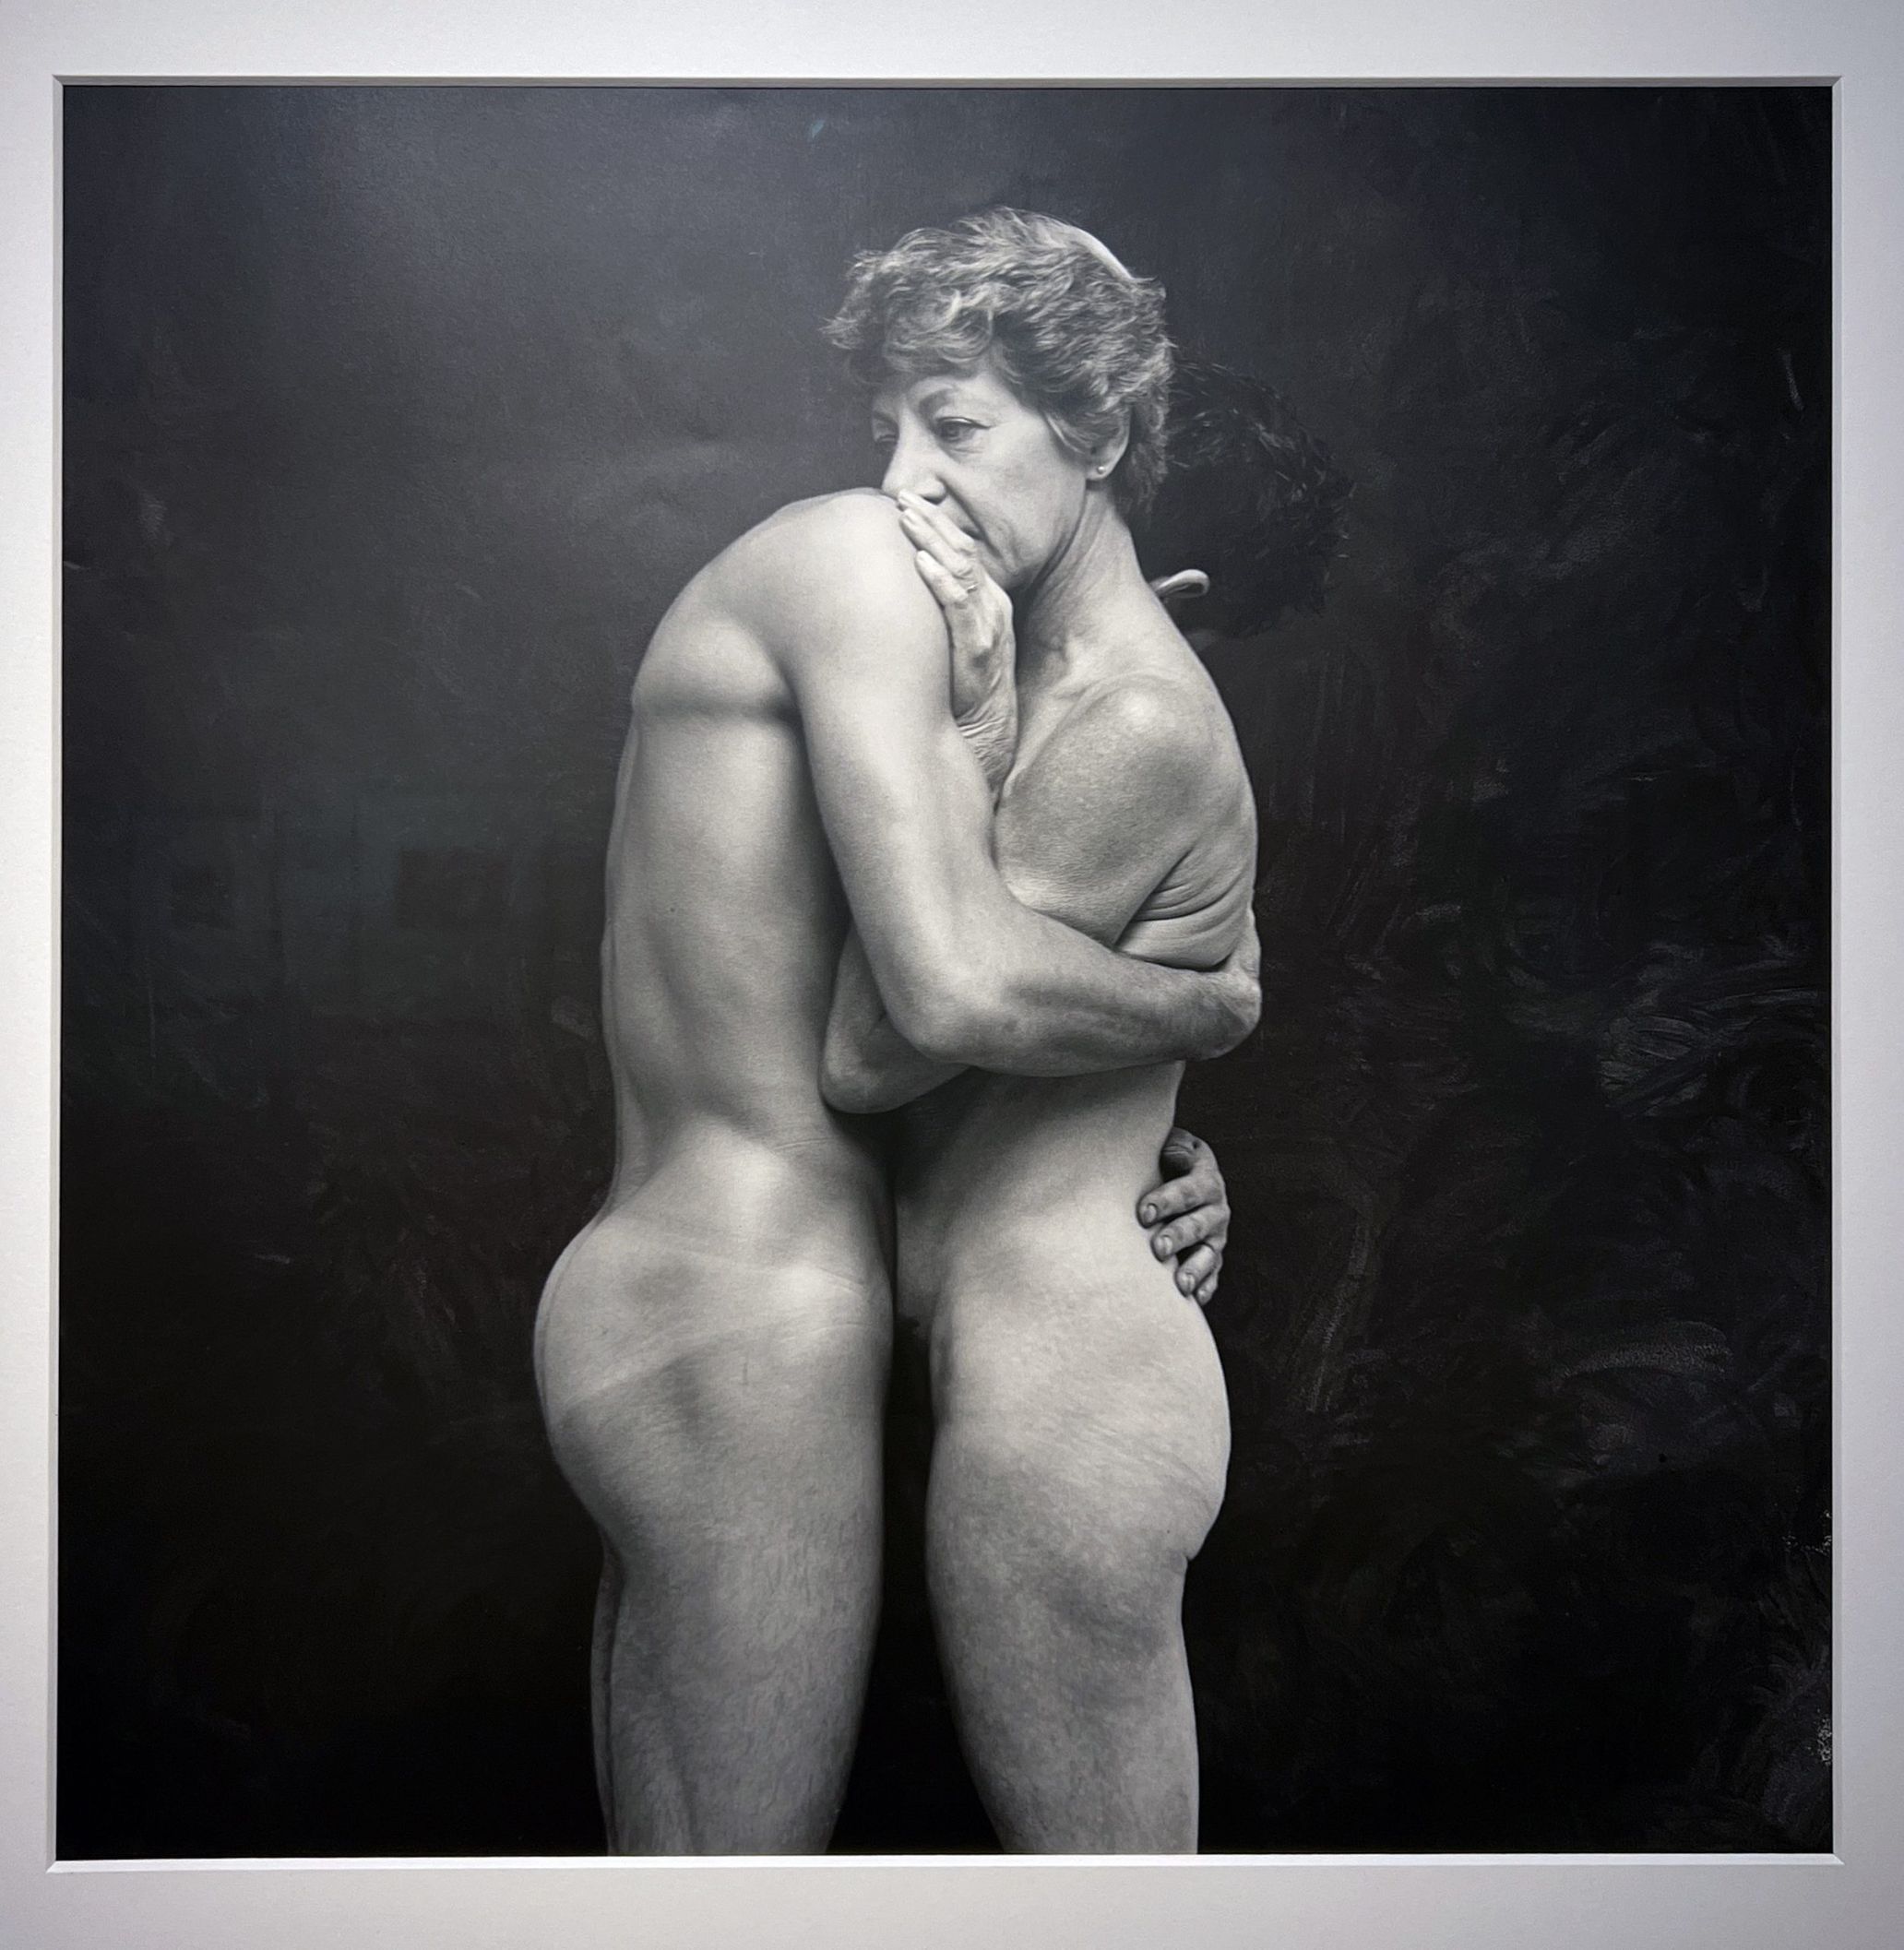 Paul Blanca ‘For my Mother. Mother and Son, 1982’. A photograph of Blanca and his mother embracing naked. Blanca embraces his mother with his whole body, while his mother looks somewhat complicated. Thirty years later, Blanca took a self-portrait of his elderly mother in his arms shortly before her death. I hoped to see a pair of the two pictures in this exhibition, but unfortunately this did not happen.